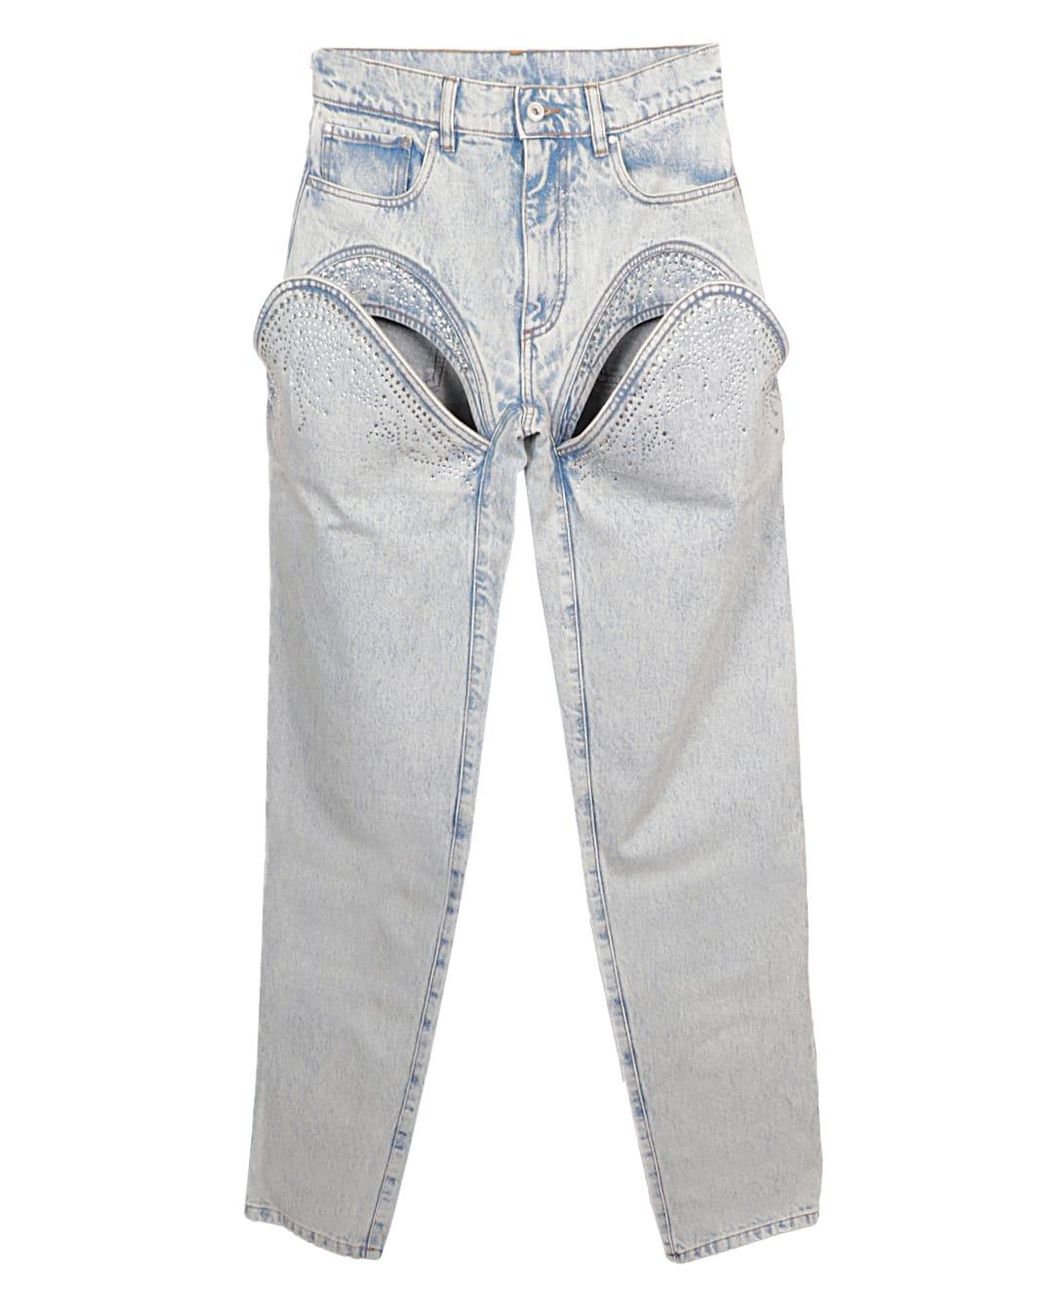 Y. Project Cut Out Rhinestone Jeans in Gray